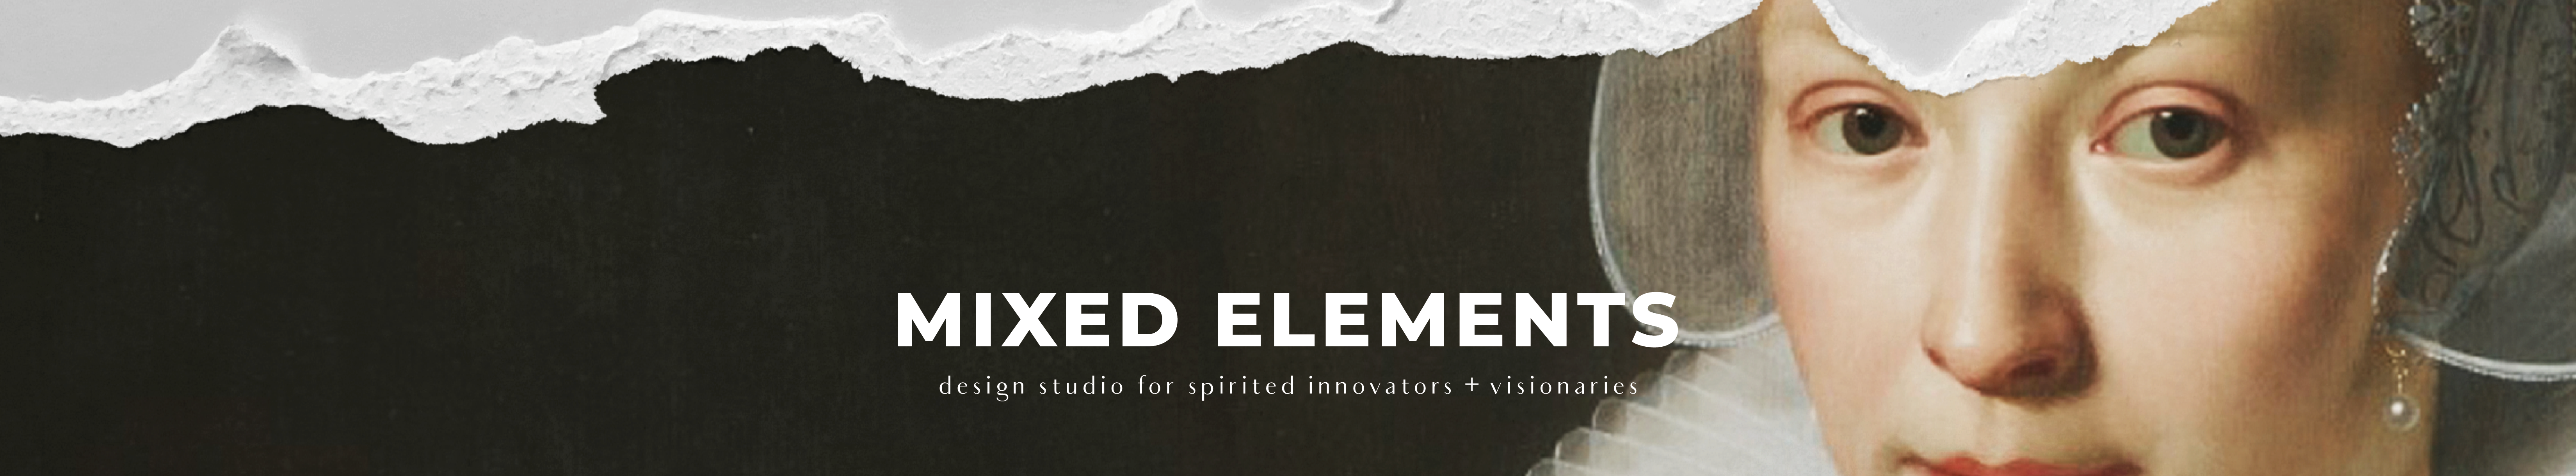 Mixed Elements's profile banner